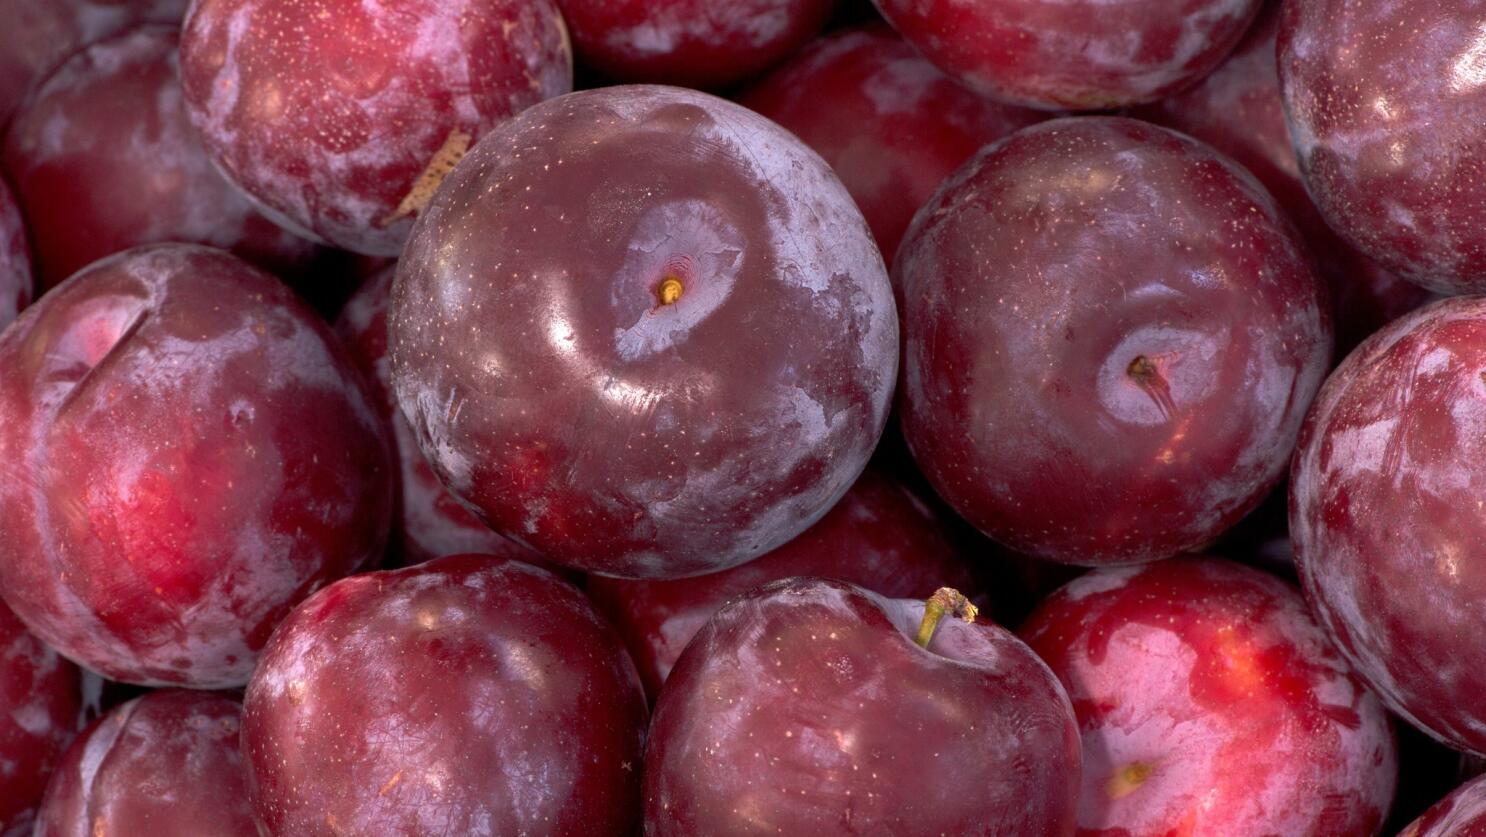 How to Select & Store Plums - The Produce Nerd